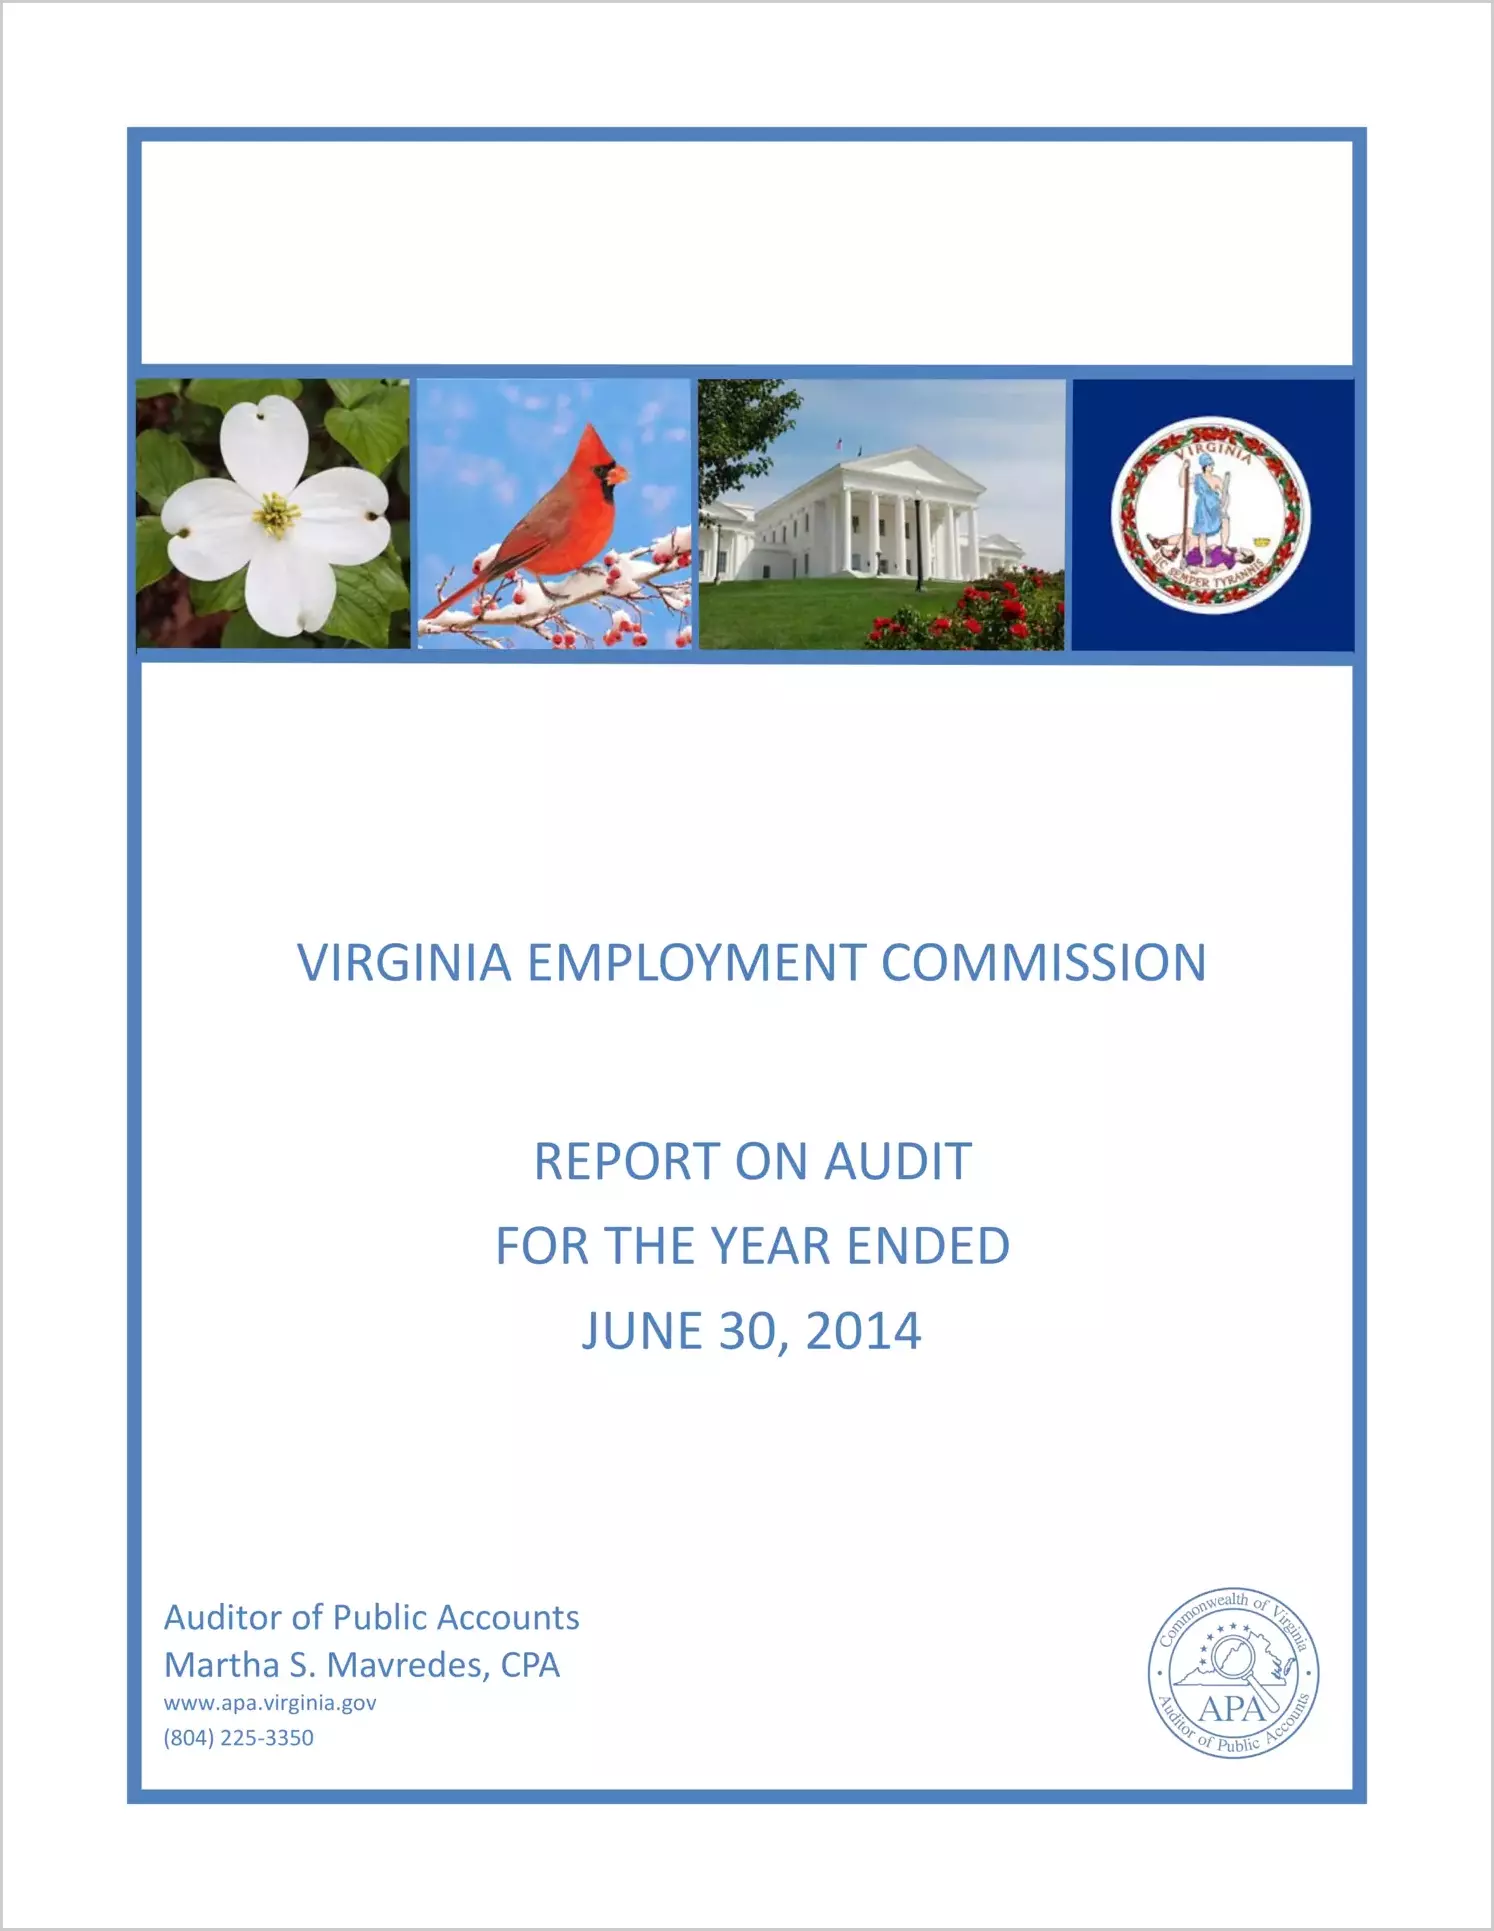 Virginia Employment Commission for the year ended June 30, 2014